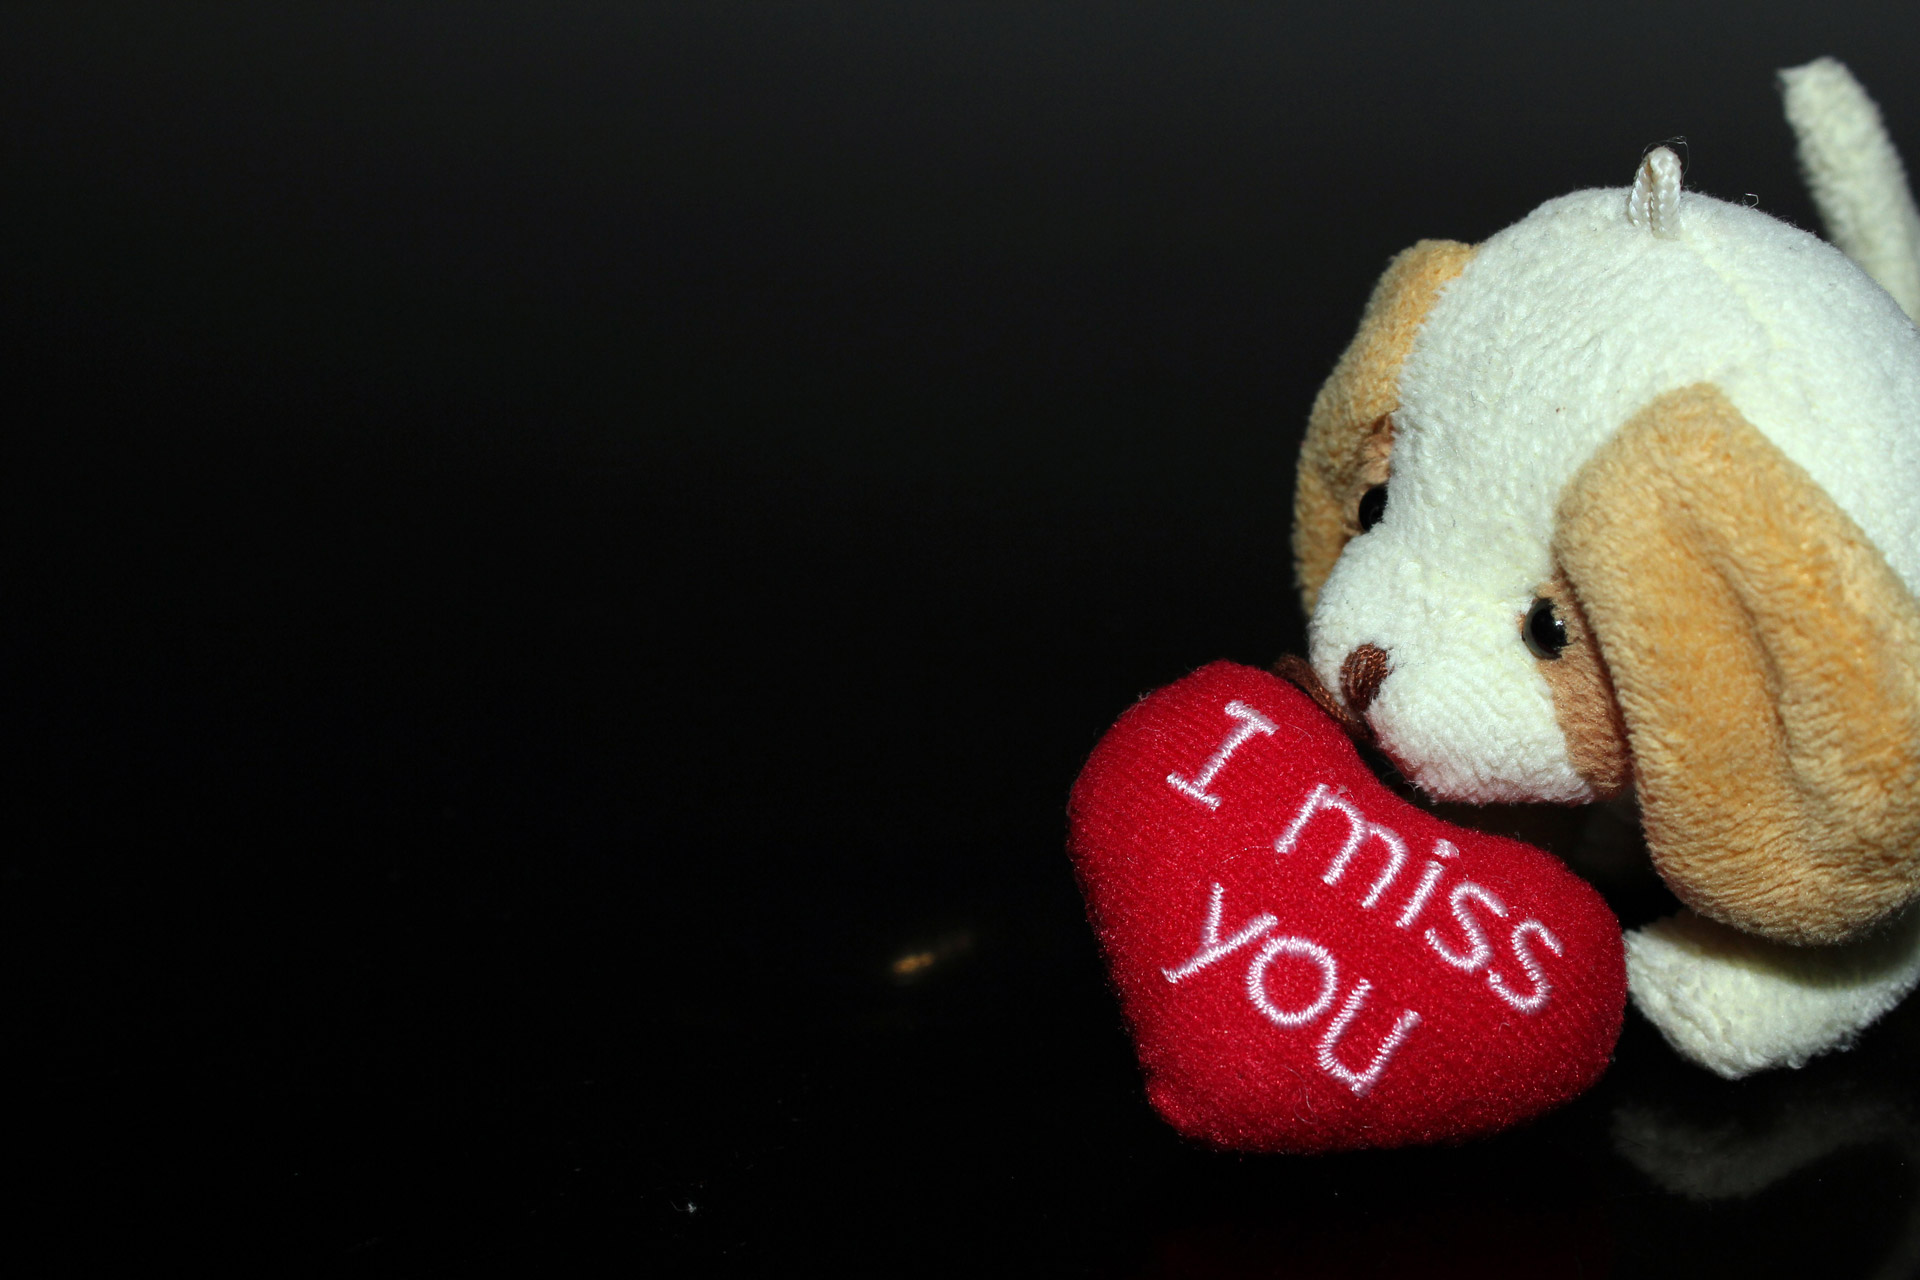 I Miss You Wallpapers HD - Wallpaper Cave